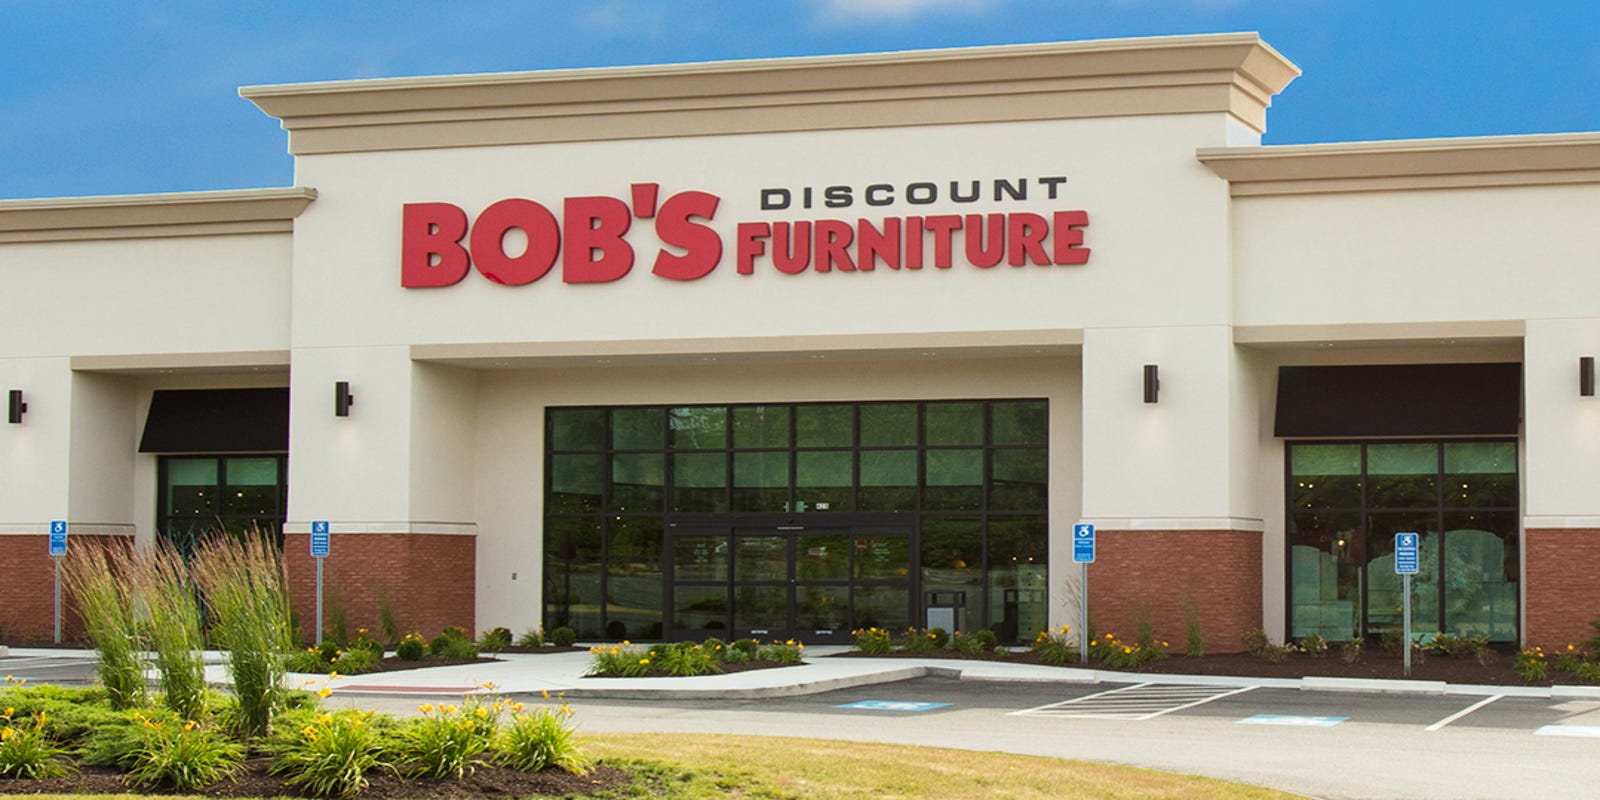 1d102f2a 5354 4598 Aa95 Ef2698a0bbc7 Bobs Discount Furniture ?crop=1079,607,x0,y234&width=1600&height=800&fit=bounds